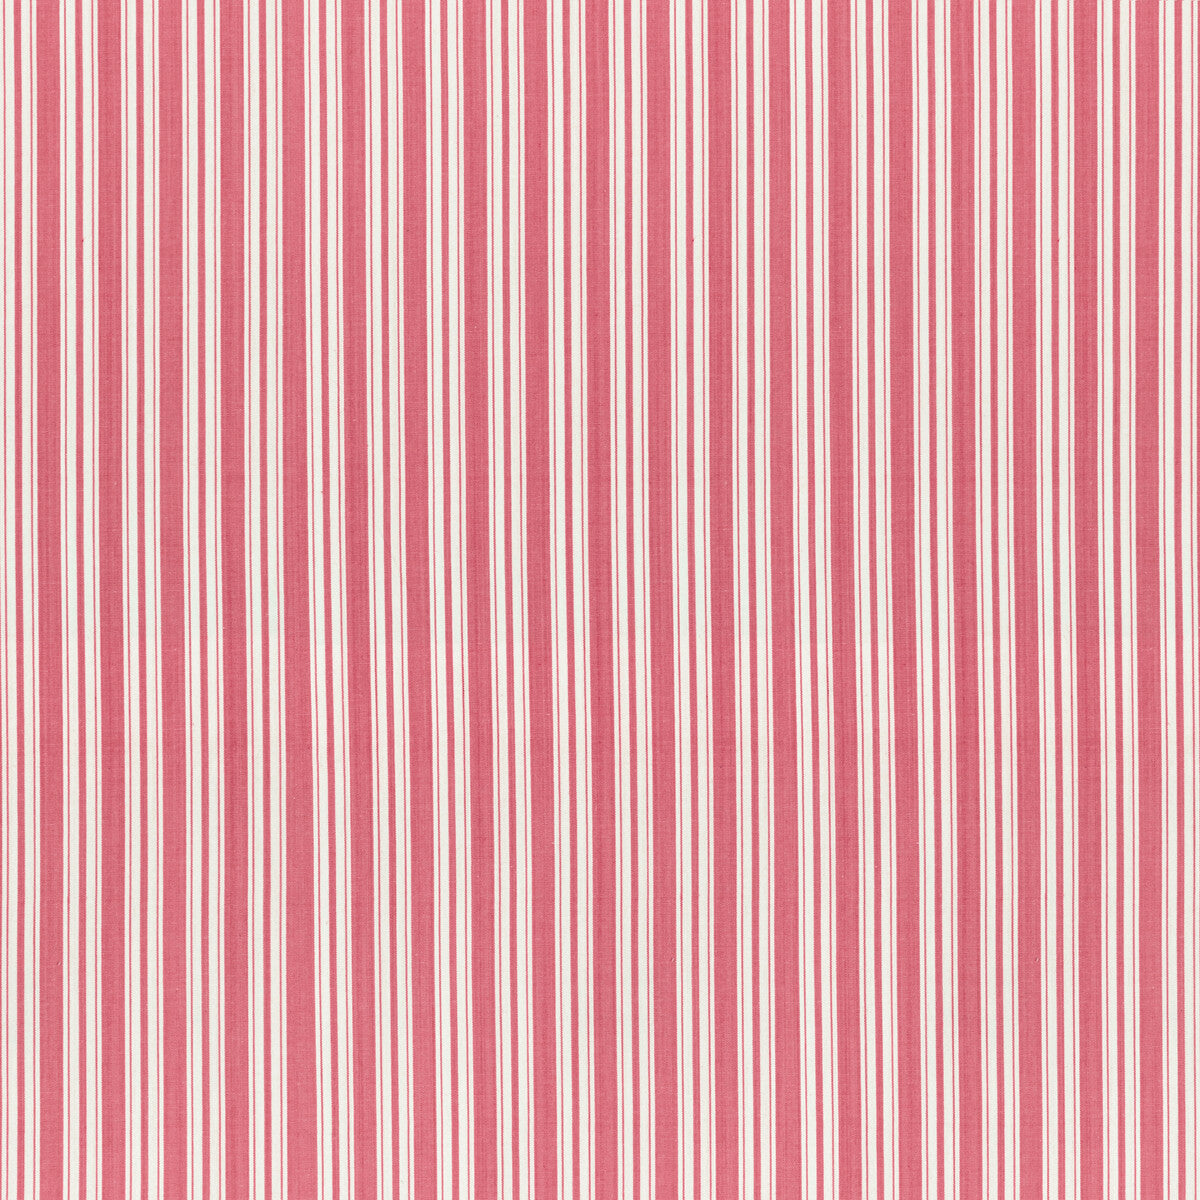 Selune Stripe fabric in rose color - pattern 8022118.7.0 - by Brunschwig &amp; Fils in the Normant Checks And Stripes II collection